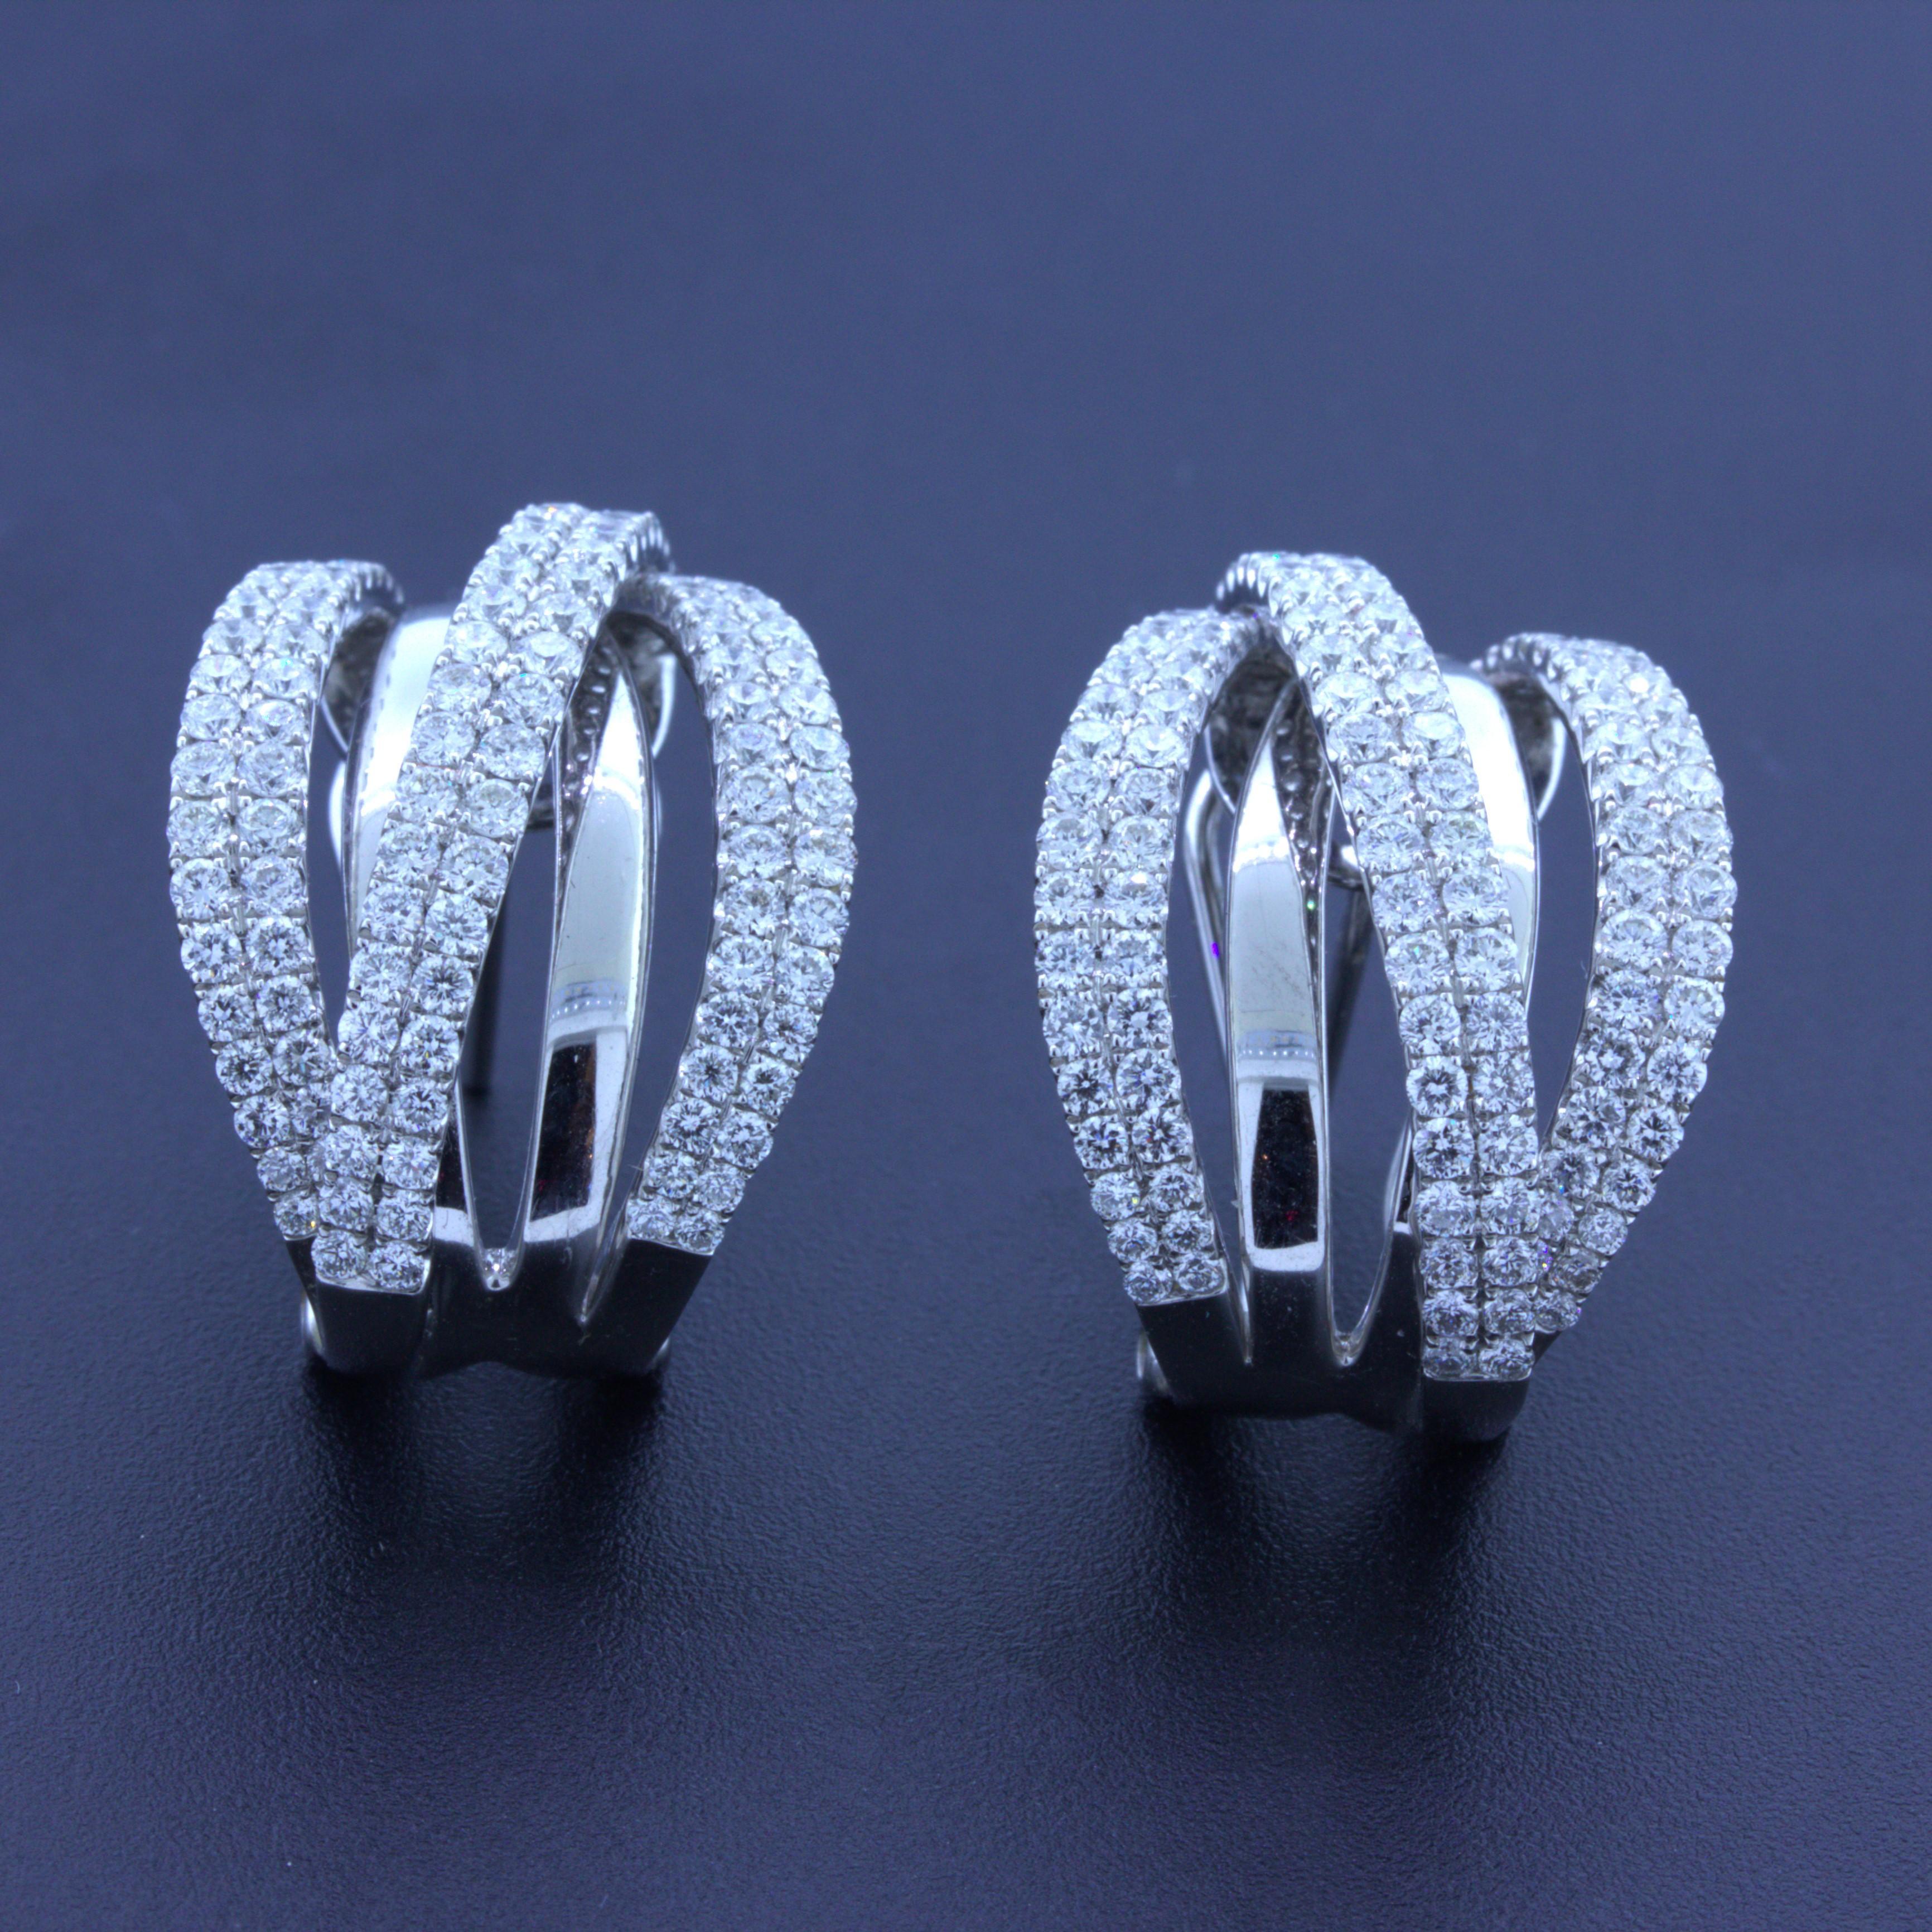 A modern take on the classic huggie, these earrings feature 3.24 carats of round brilliant-cut diamonds set in overlapping rows giving the piece a 3-dimensional look. Made in 18k white gold, these huggies are stylish and feature very fine VS F-G